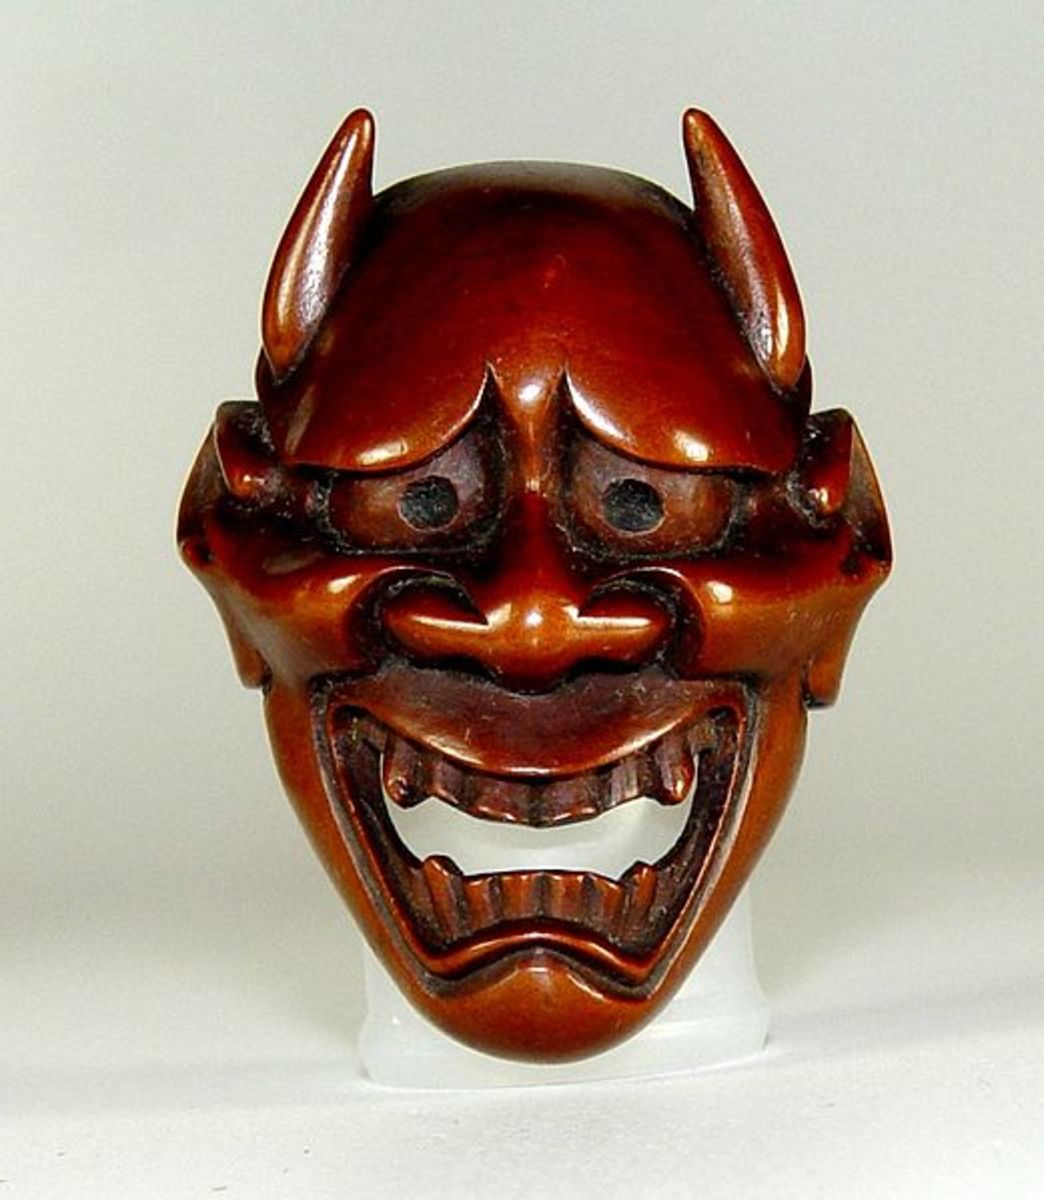 Japanese Hannya Mask Tattoo Designs, Meanings, and Ideas ...